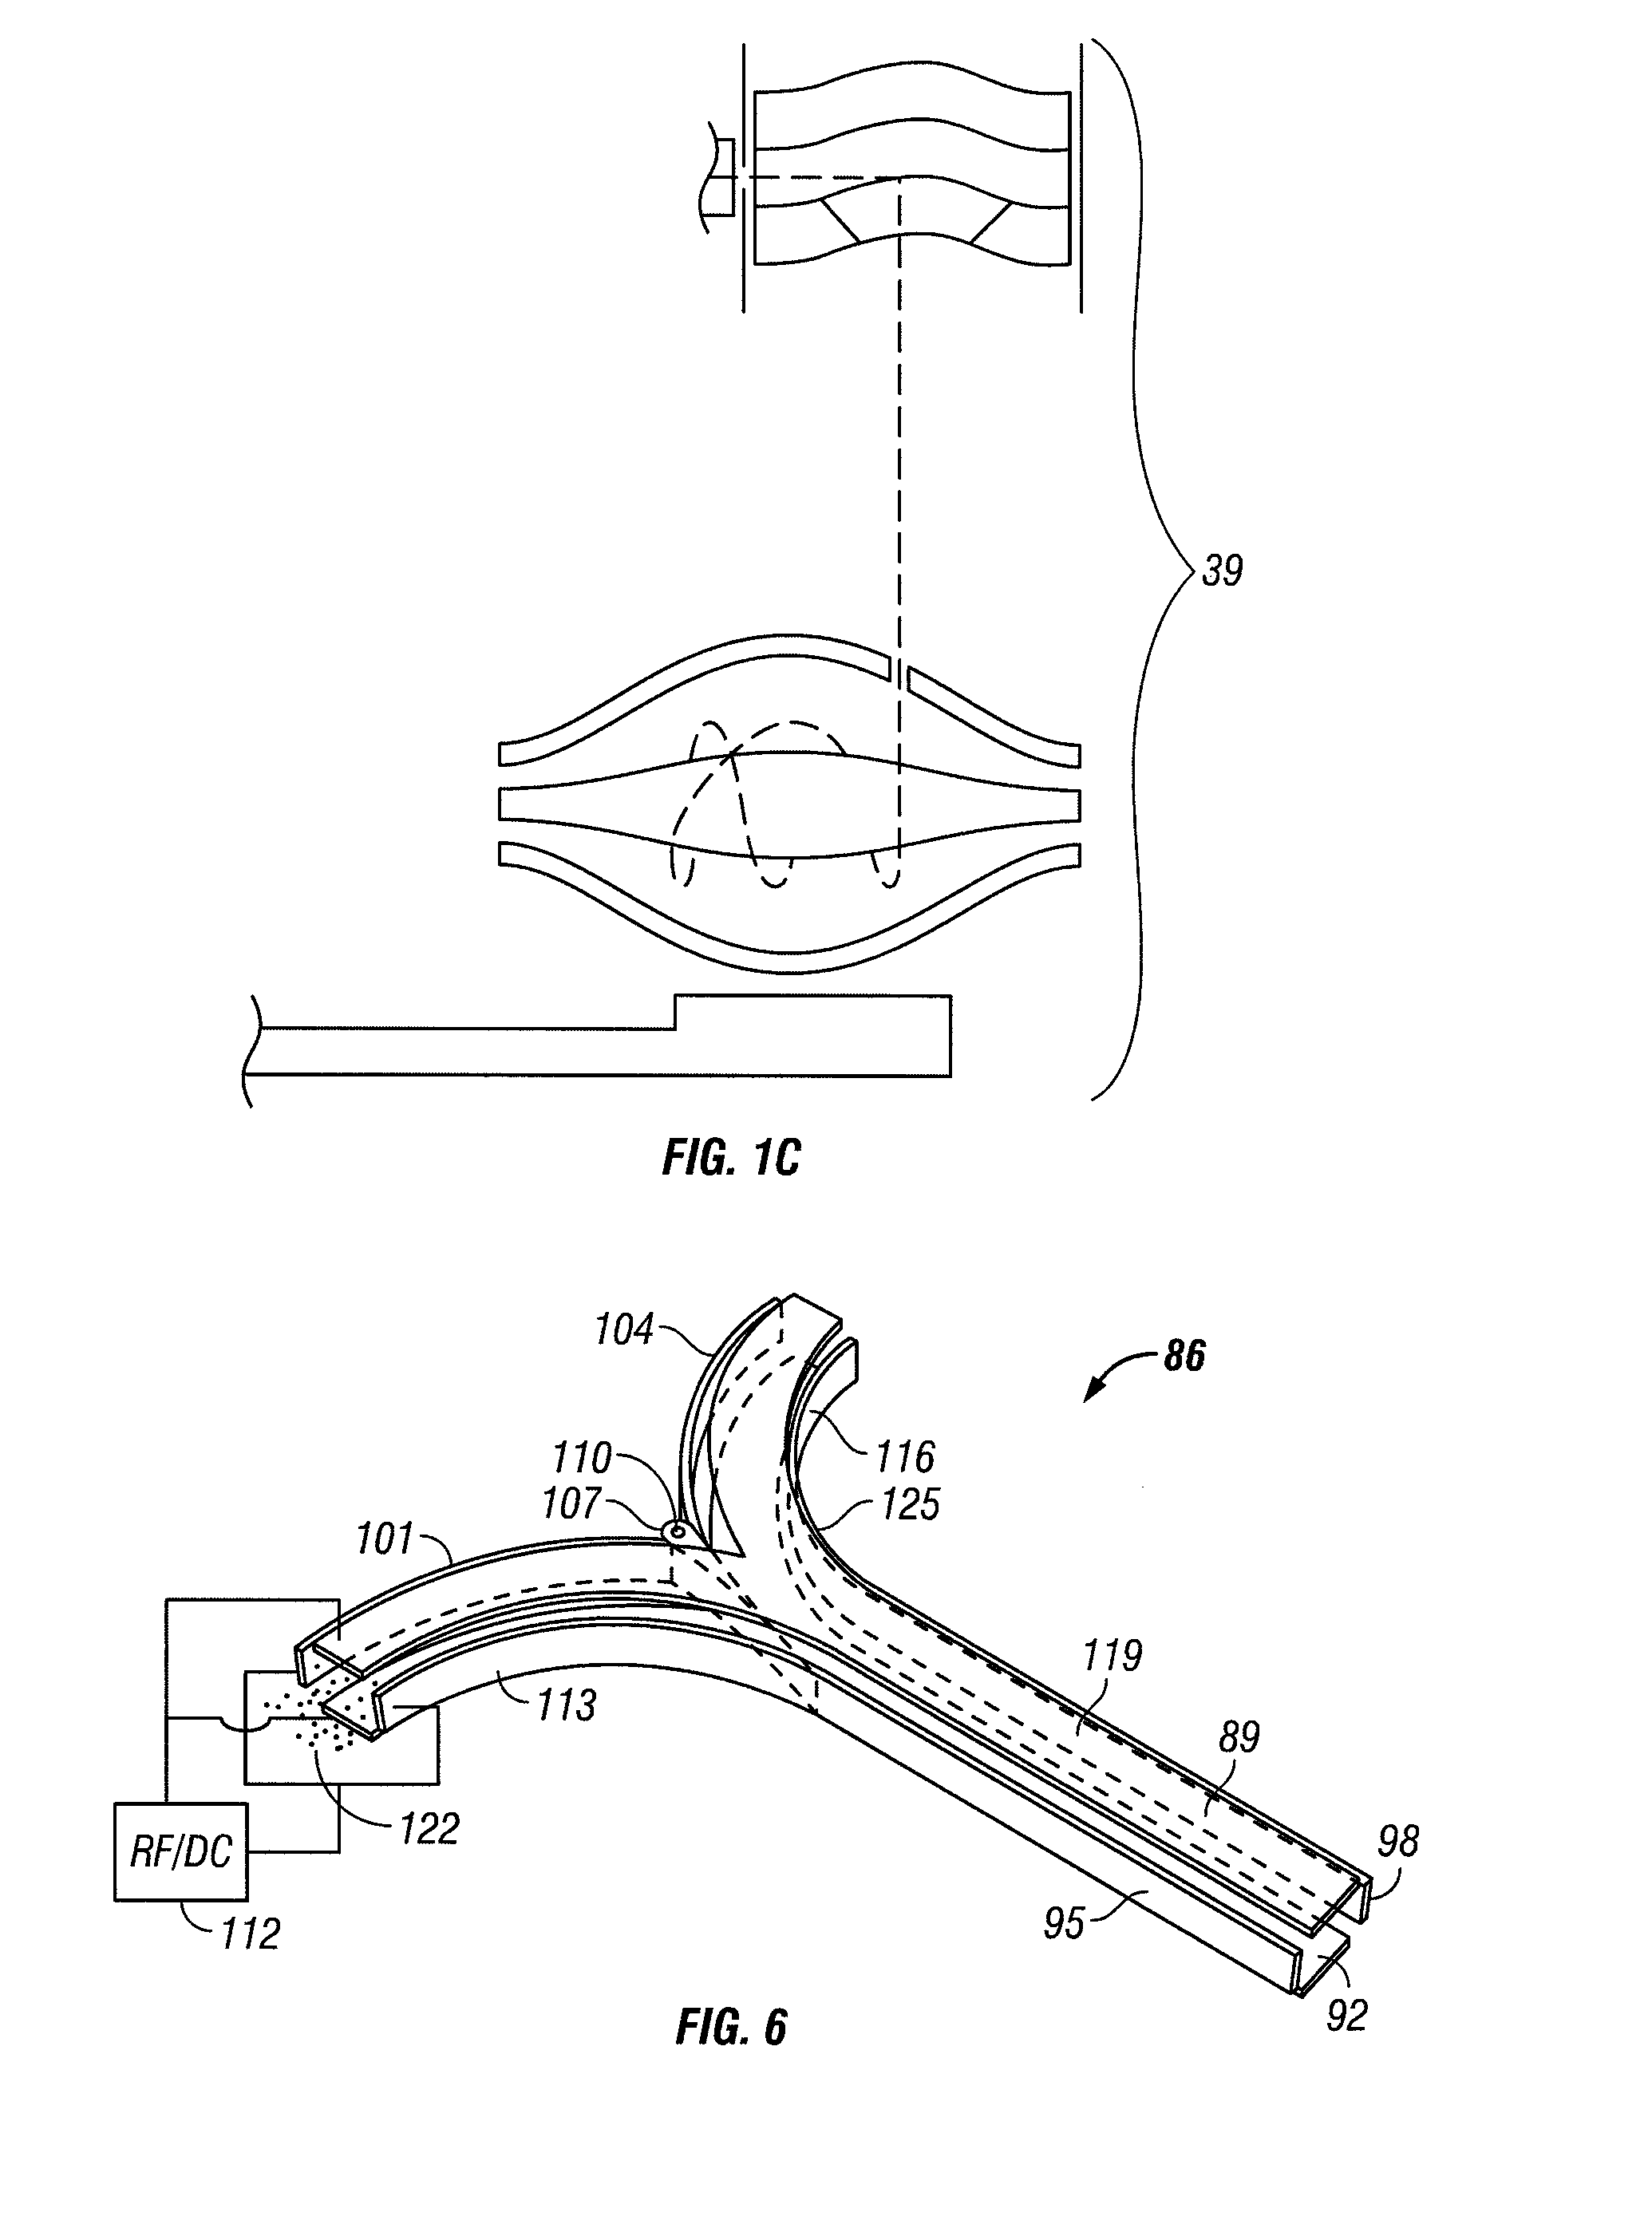 Hybrid mass spectrometer with branched ion path and switch